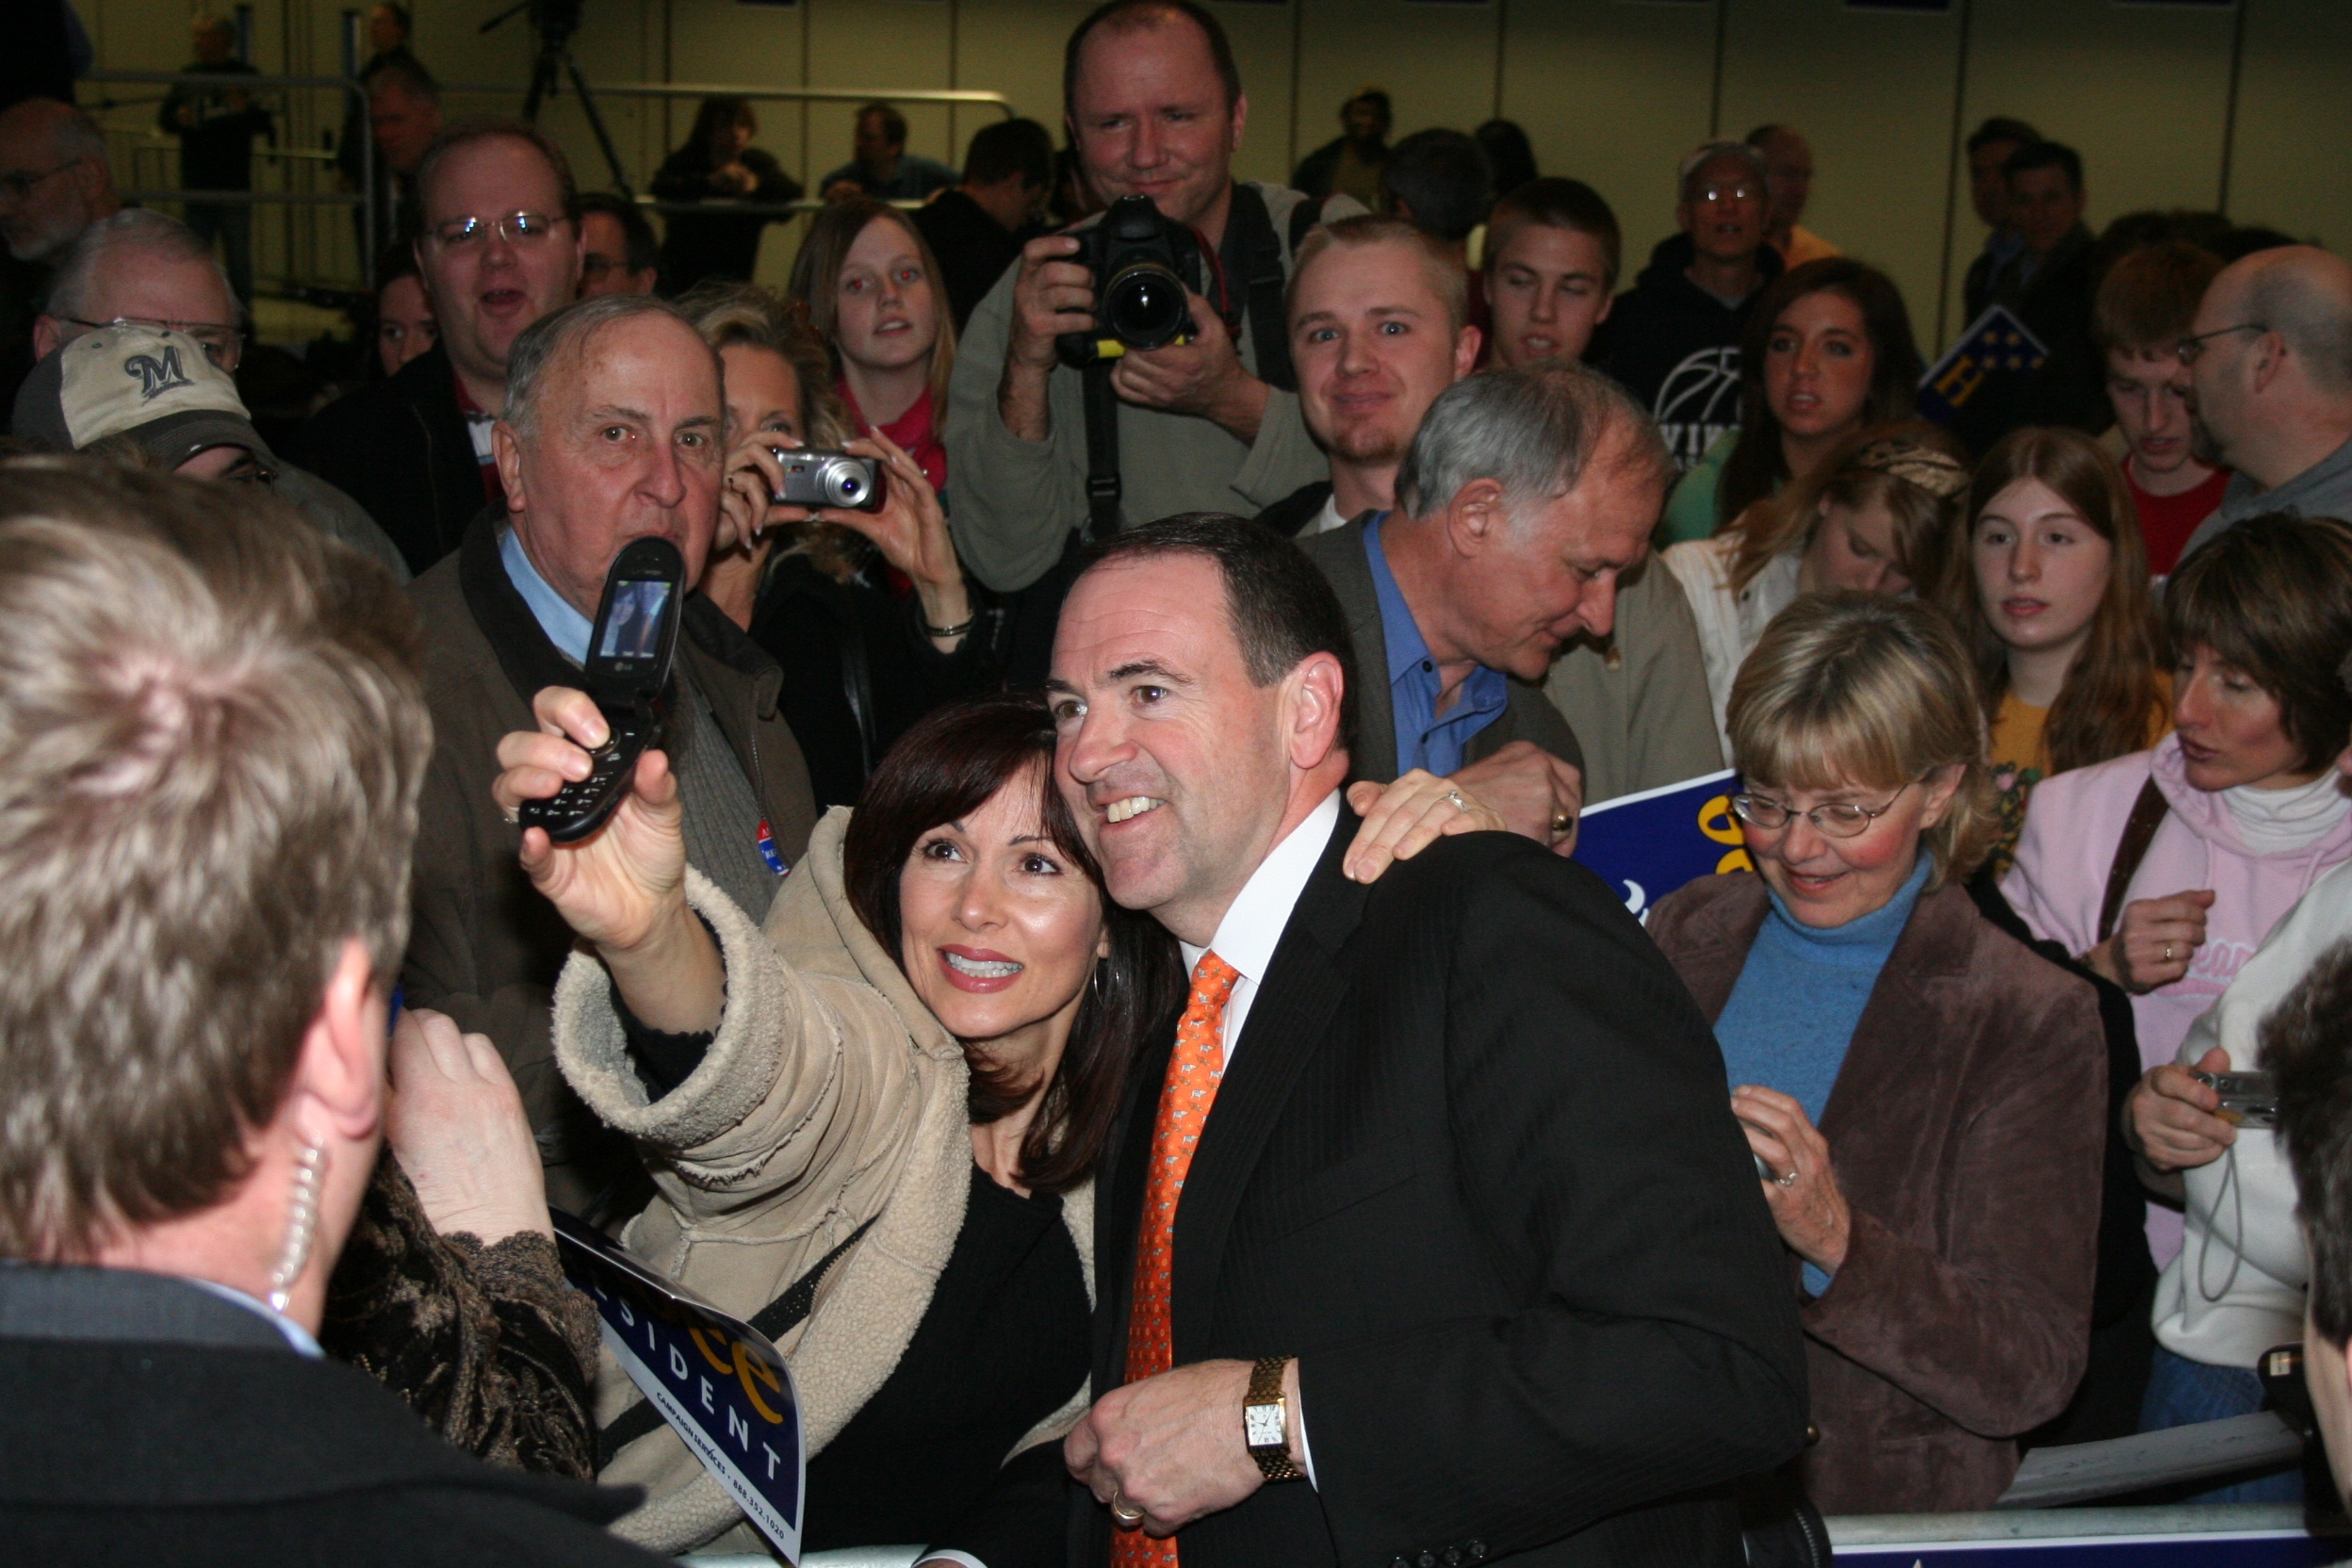 Former_Arkansas_Governor_and_2008_Republican_presidential_candidate_Mike_Huckabee_with_a_supporter_at_a_campaign_rally_in_Wisconsin